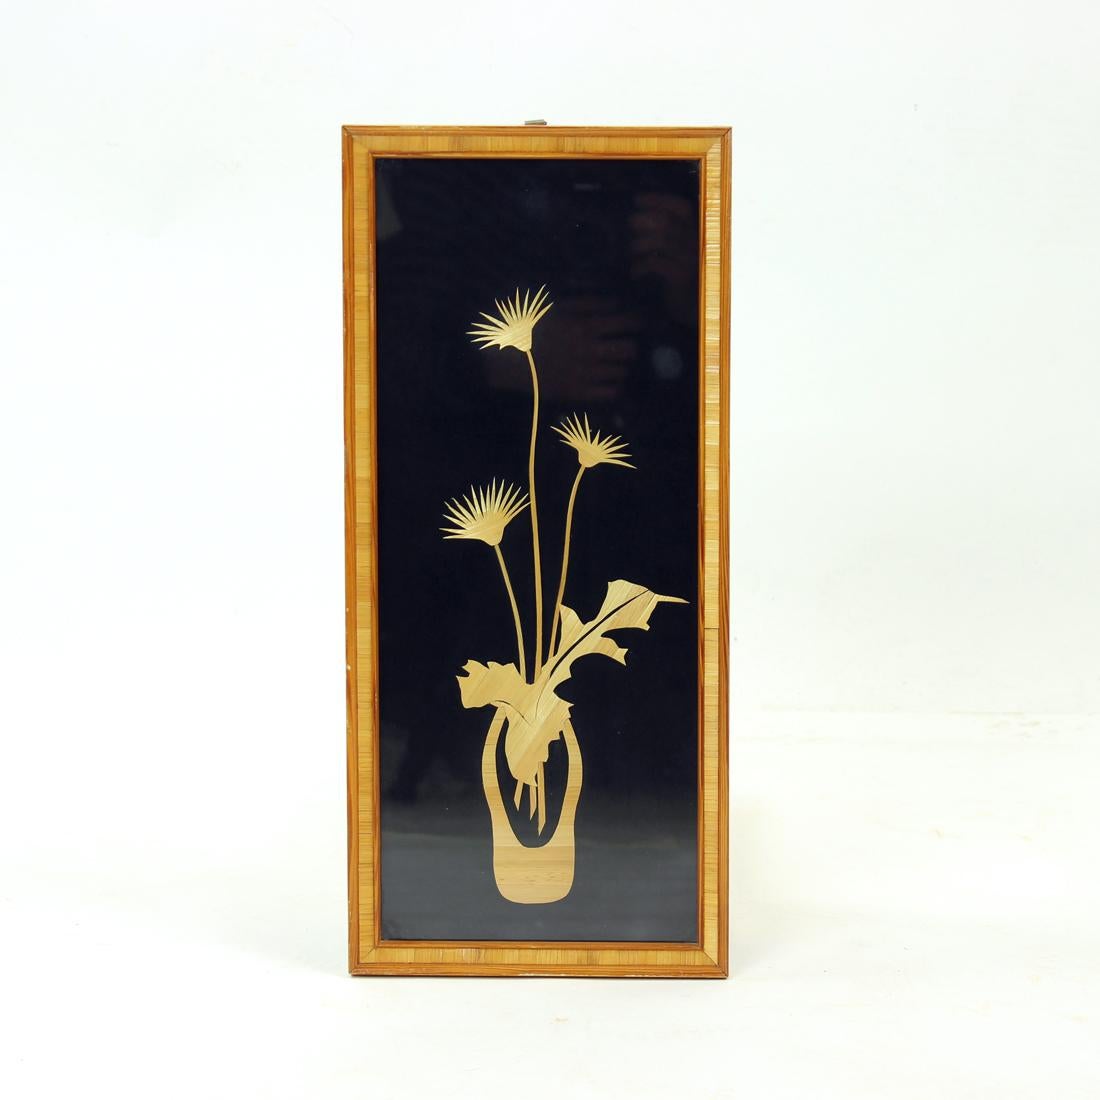 Beautiful wall art piece for Czechoslovakia in 1960s. The art piece was created in Czechoslovakia and shows a typical style of the era. The original wooden frame holds black background on which flowers are made out of straw. The art is under a glass